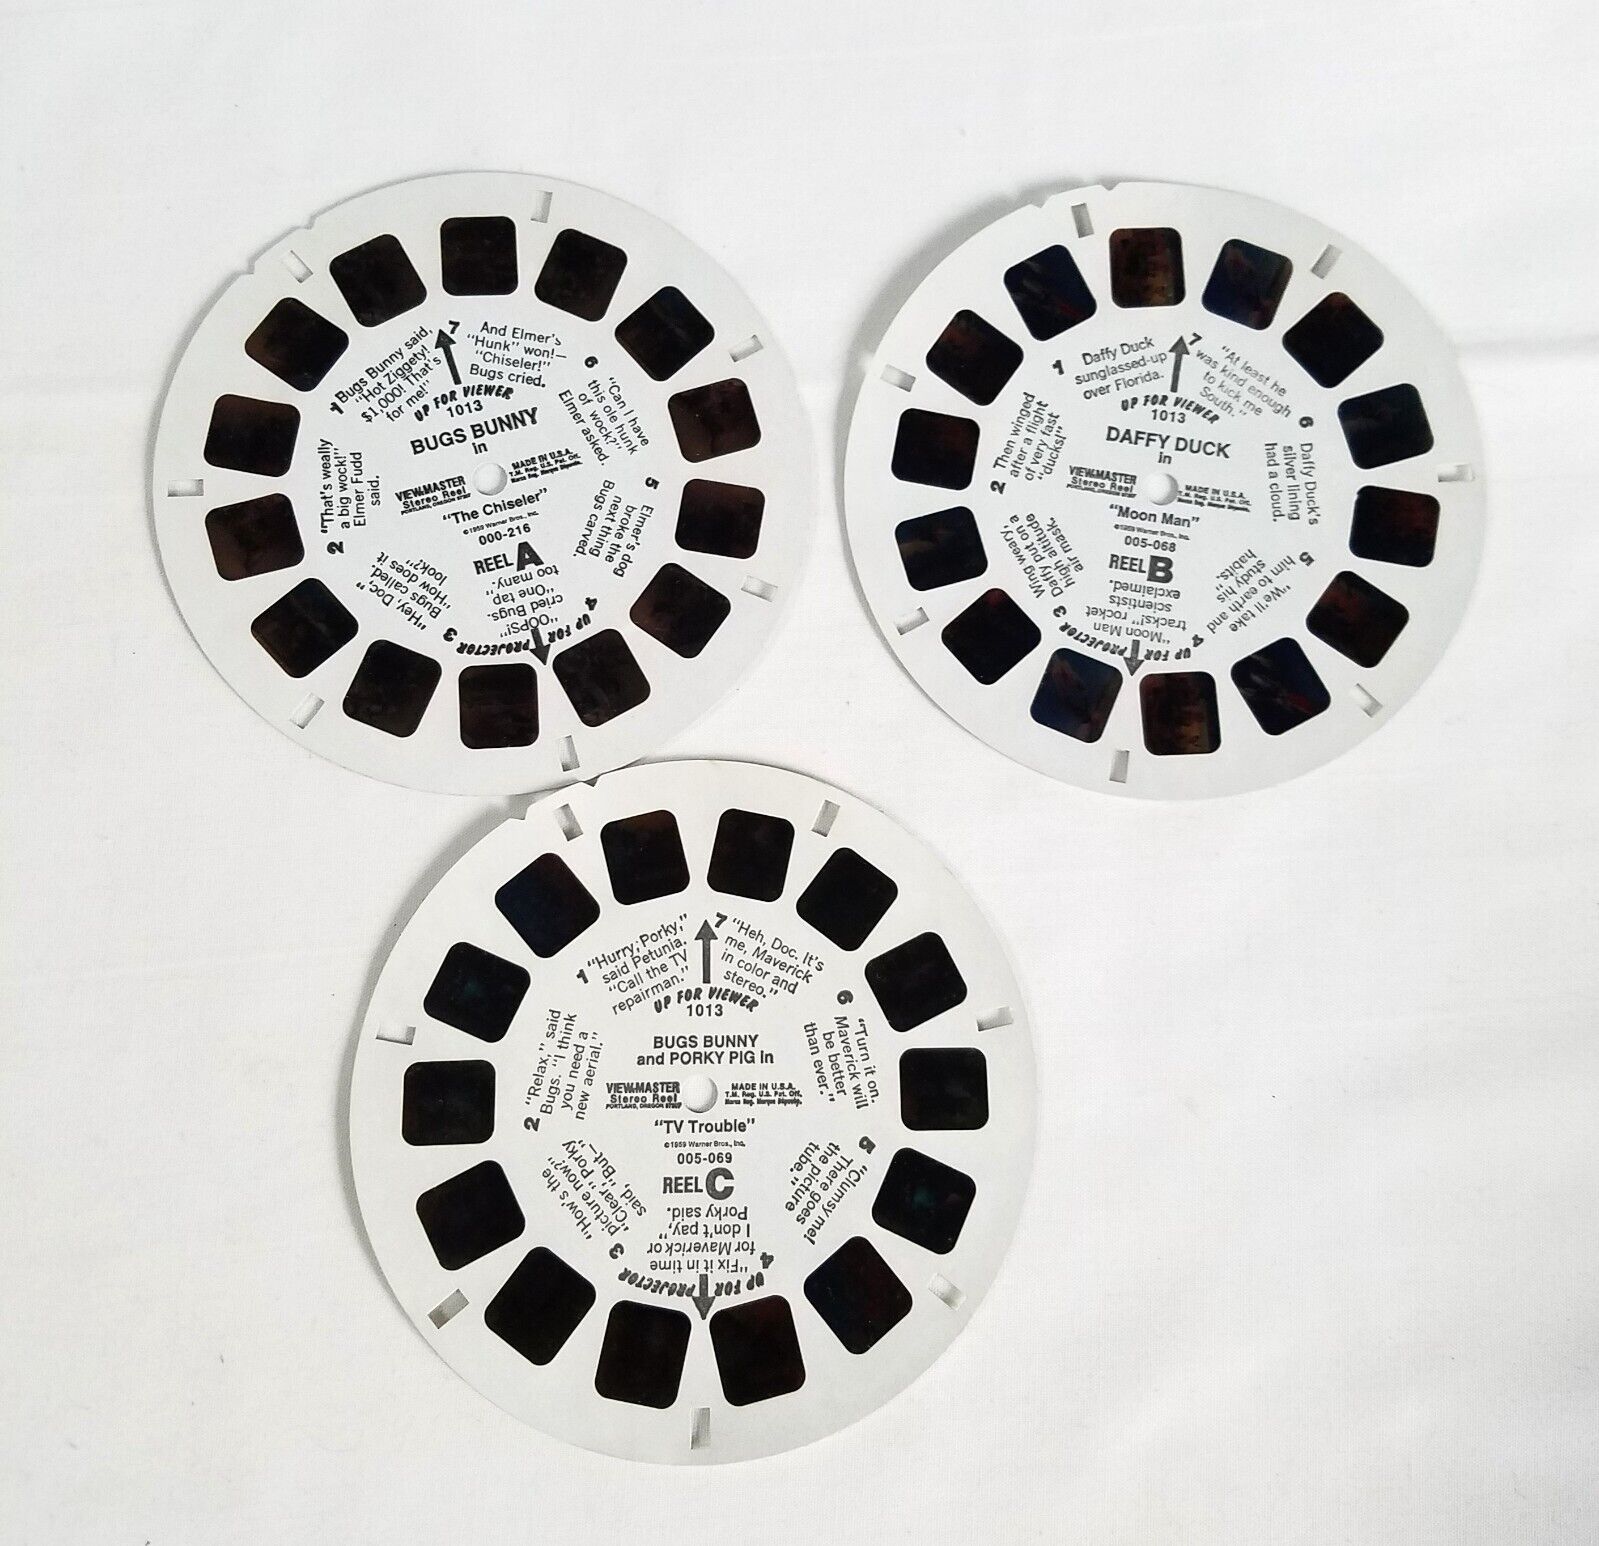 Vintage Viewmaster Reels Bugs Bunny Porky Pig Daffy Duck Vintage Viewmaster 1959